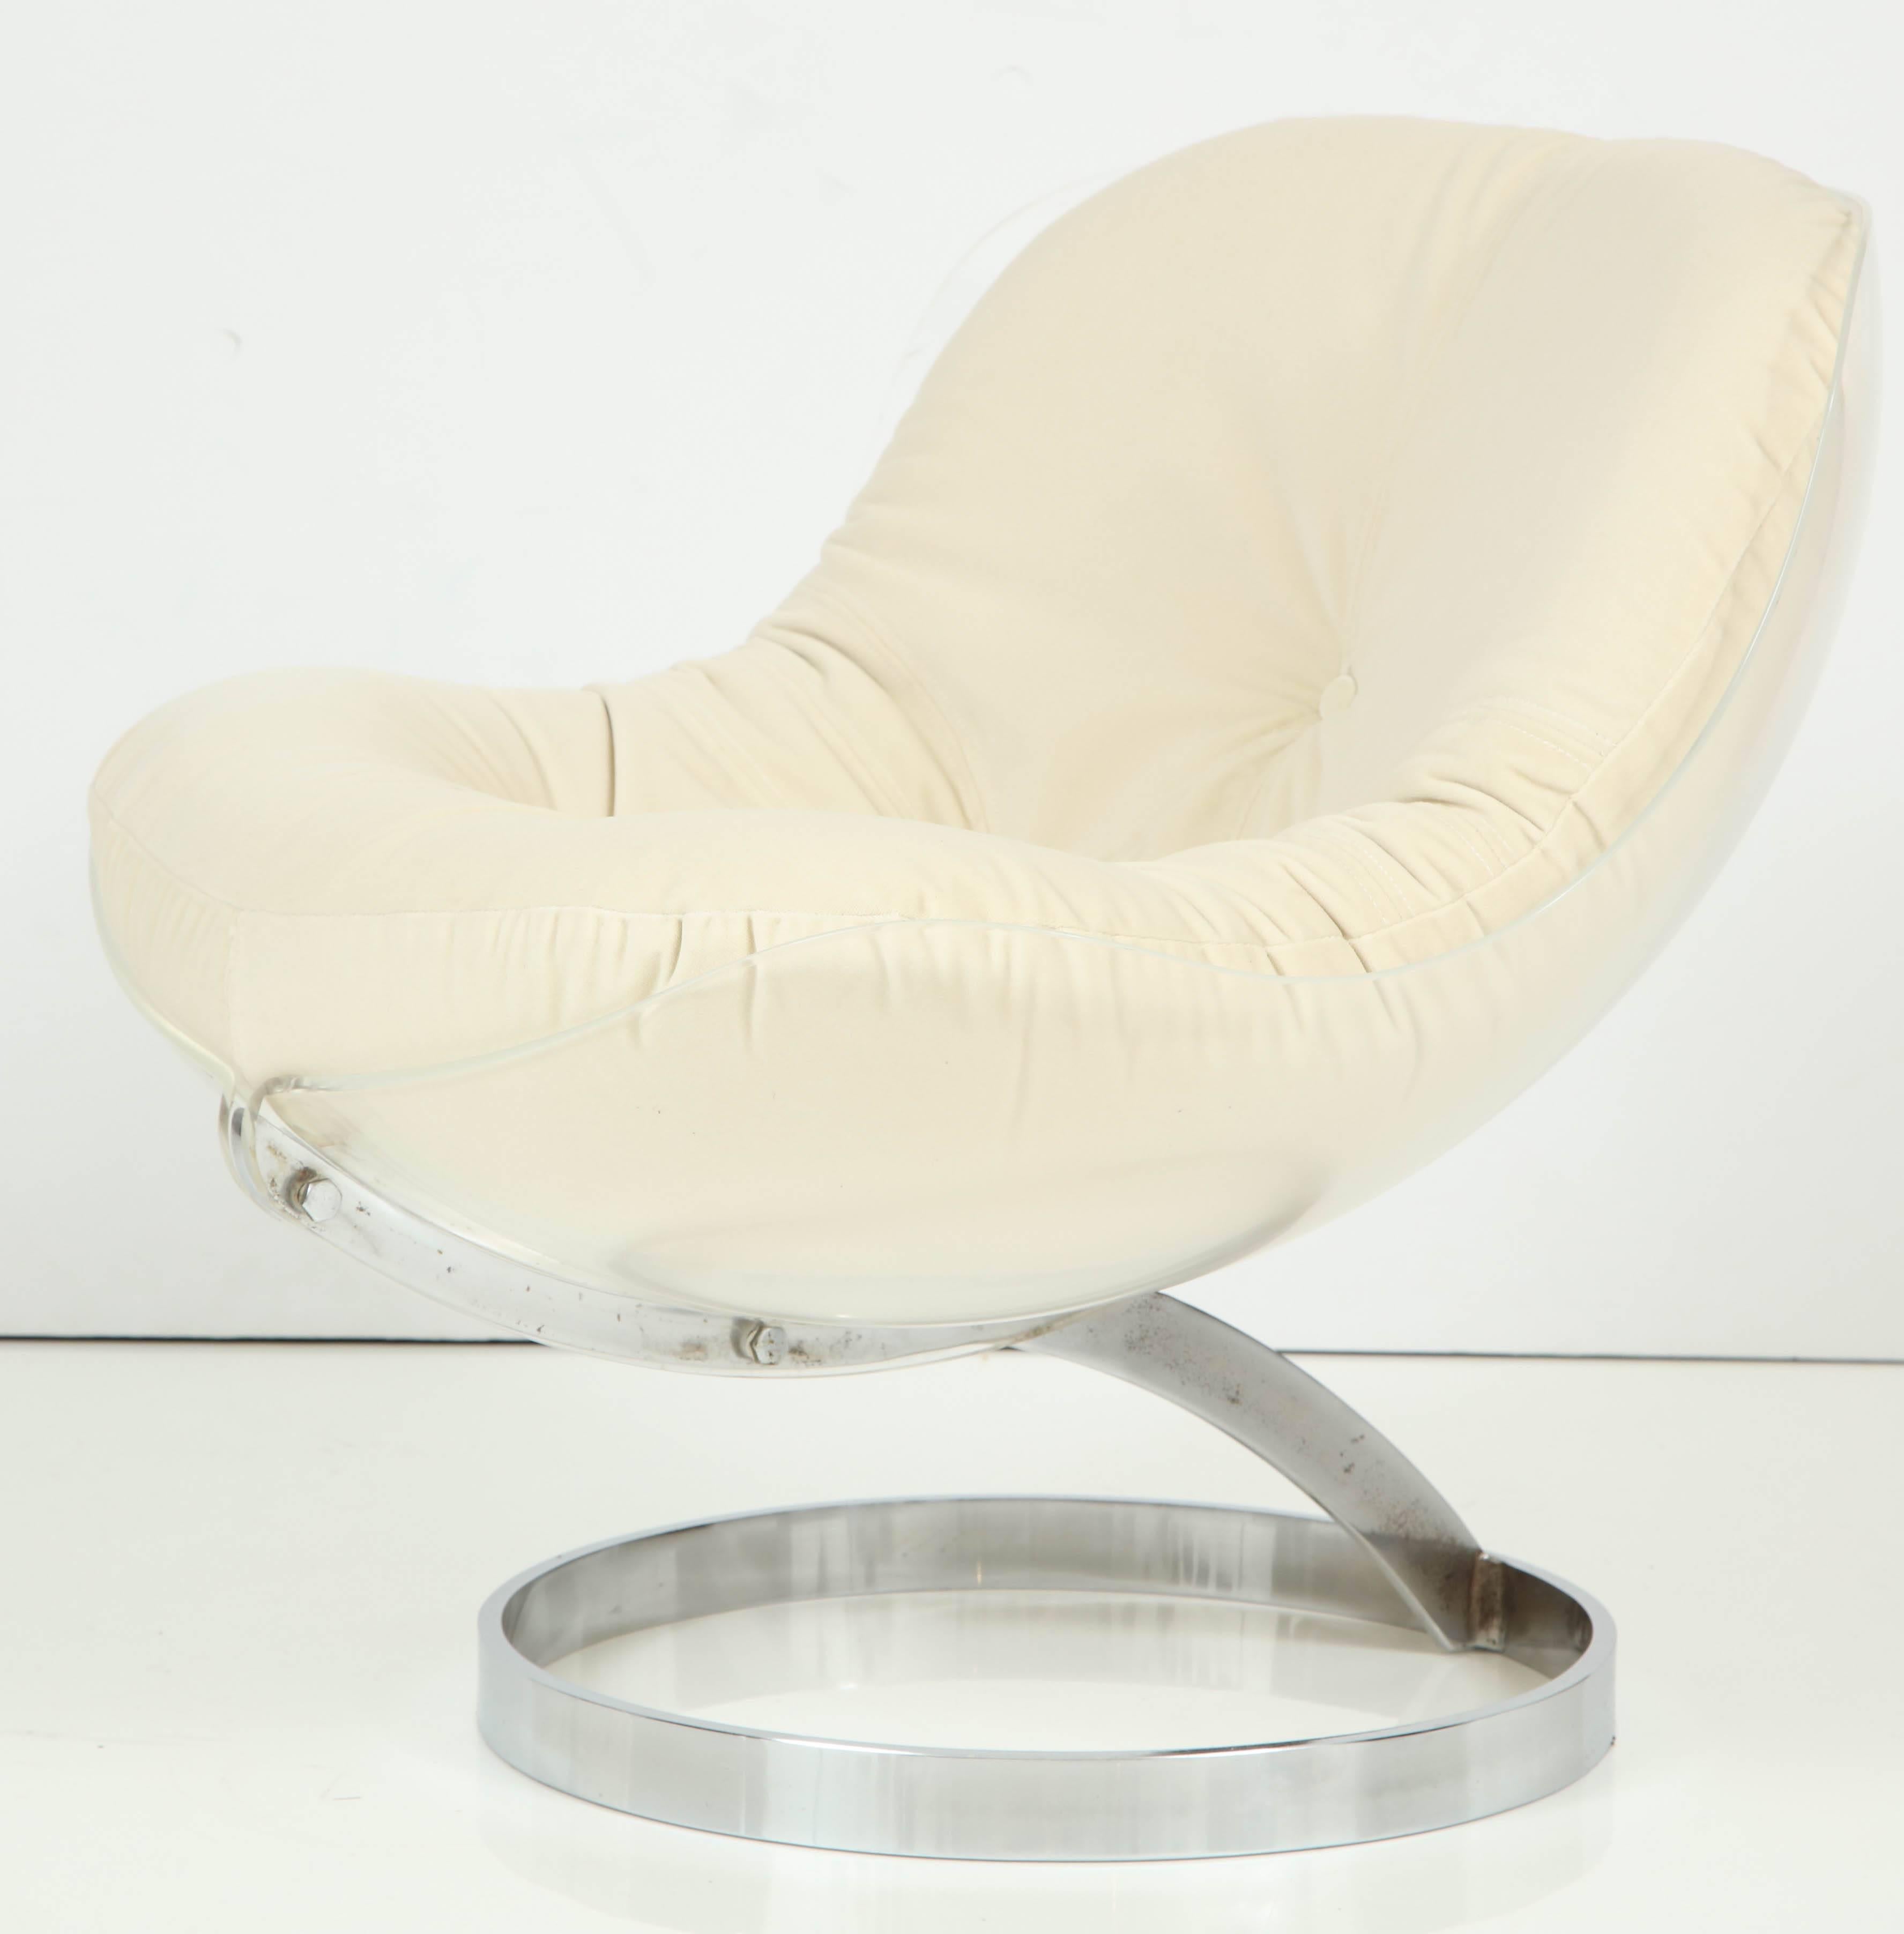 Rare clear sphere chair by Boris Tabacoff, France 1970. Chrome on good shape, reupholstered after the original cover.